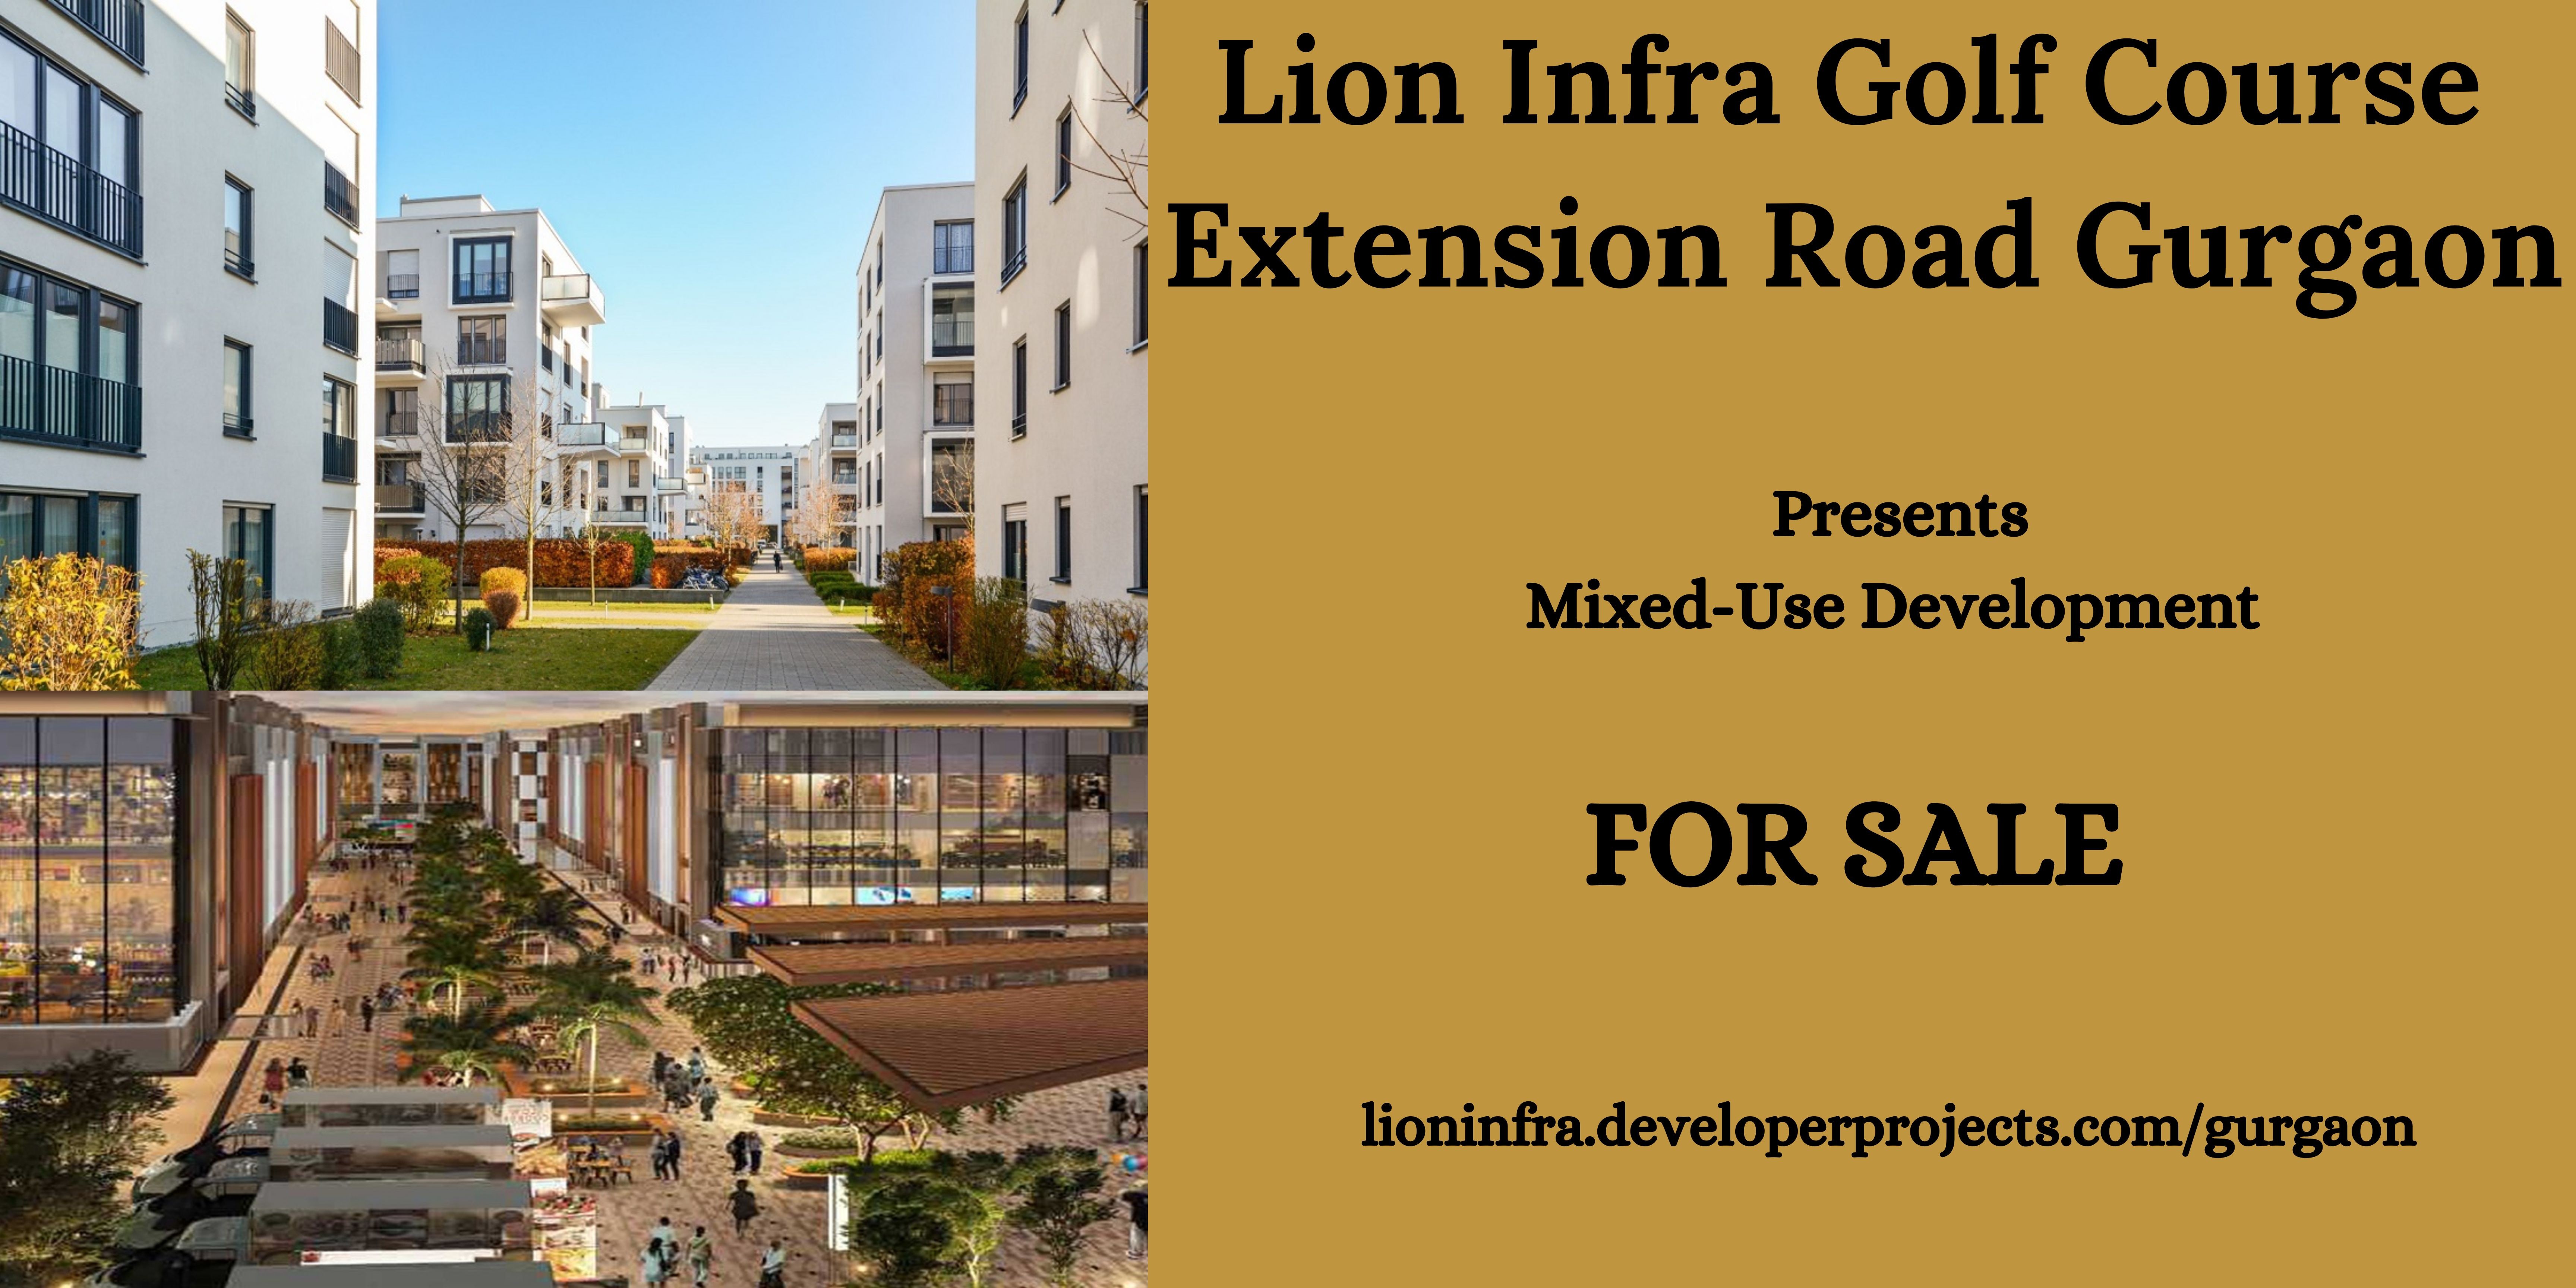 Lion Infra Golf Course Extension Road Gurgaon Profile Picture